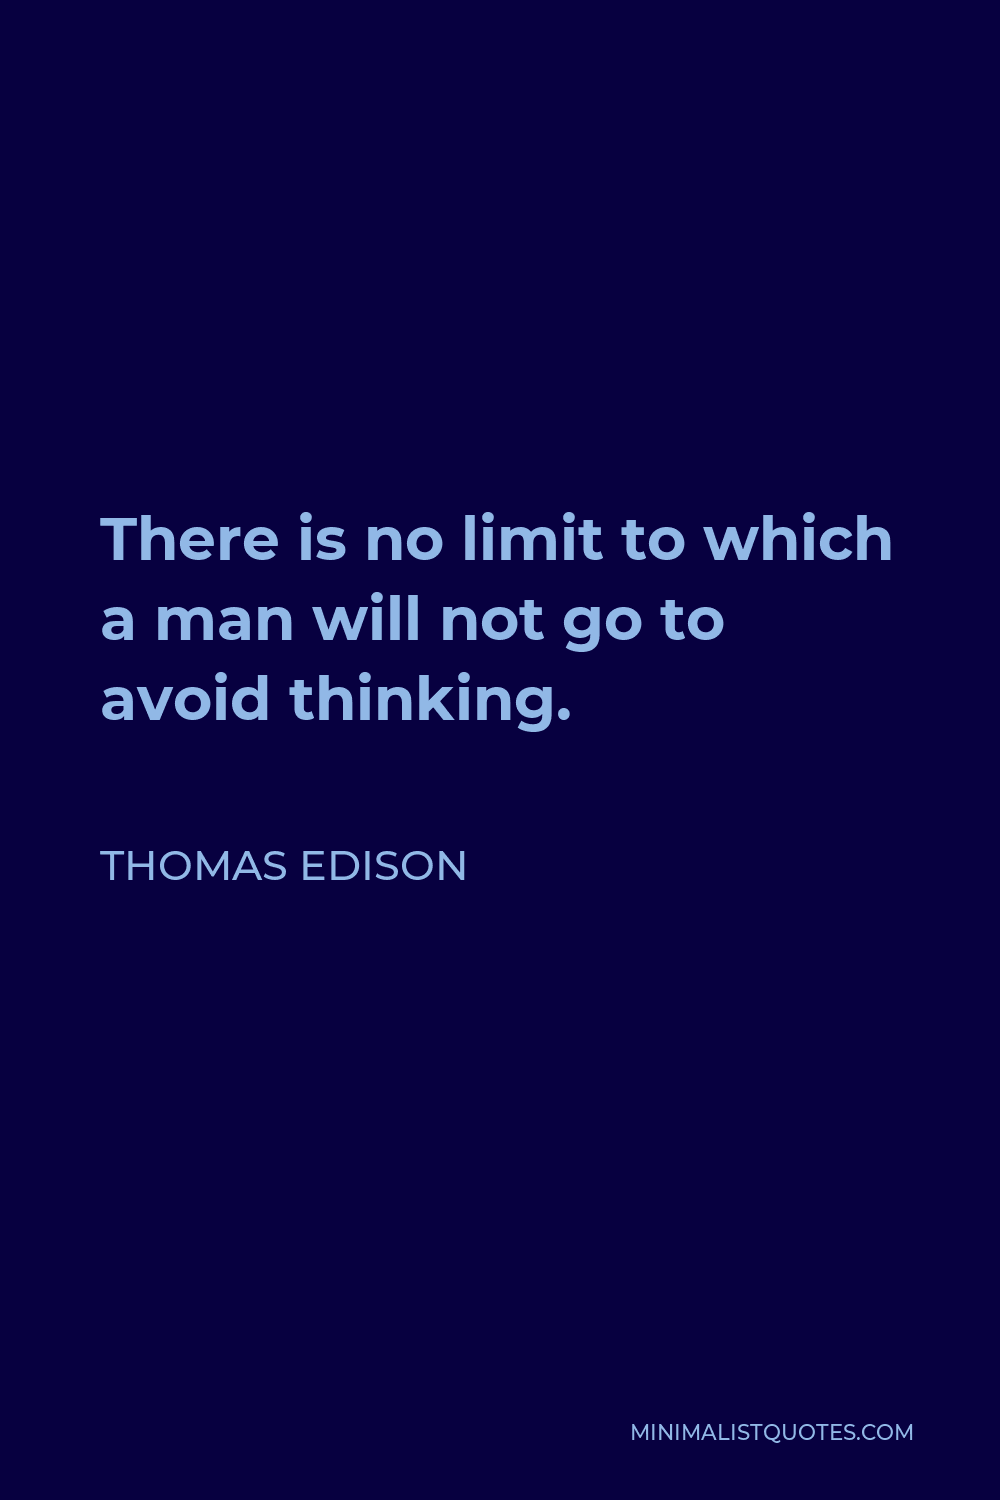 Thomas Edison Quote - There is no limit to which a man will not go to avoid thinking.